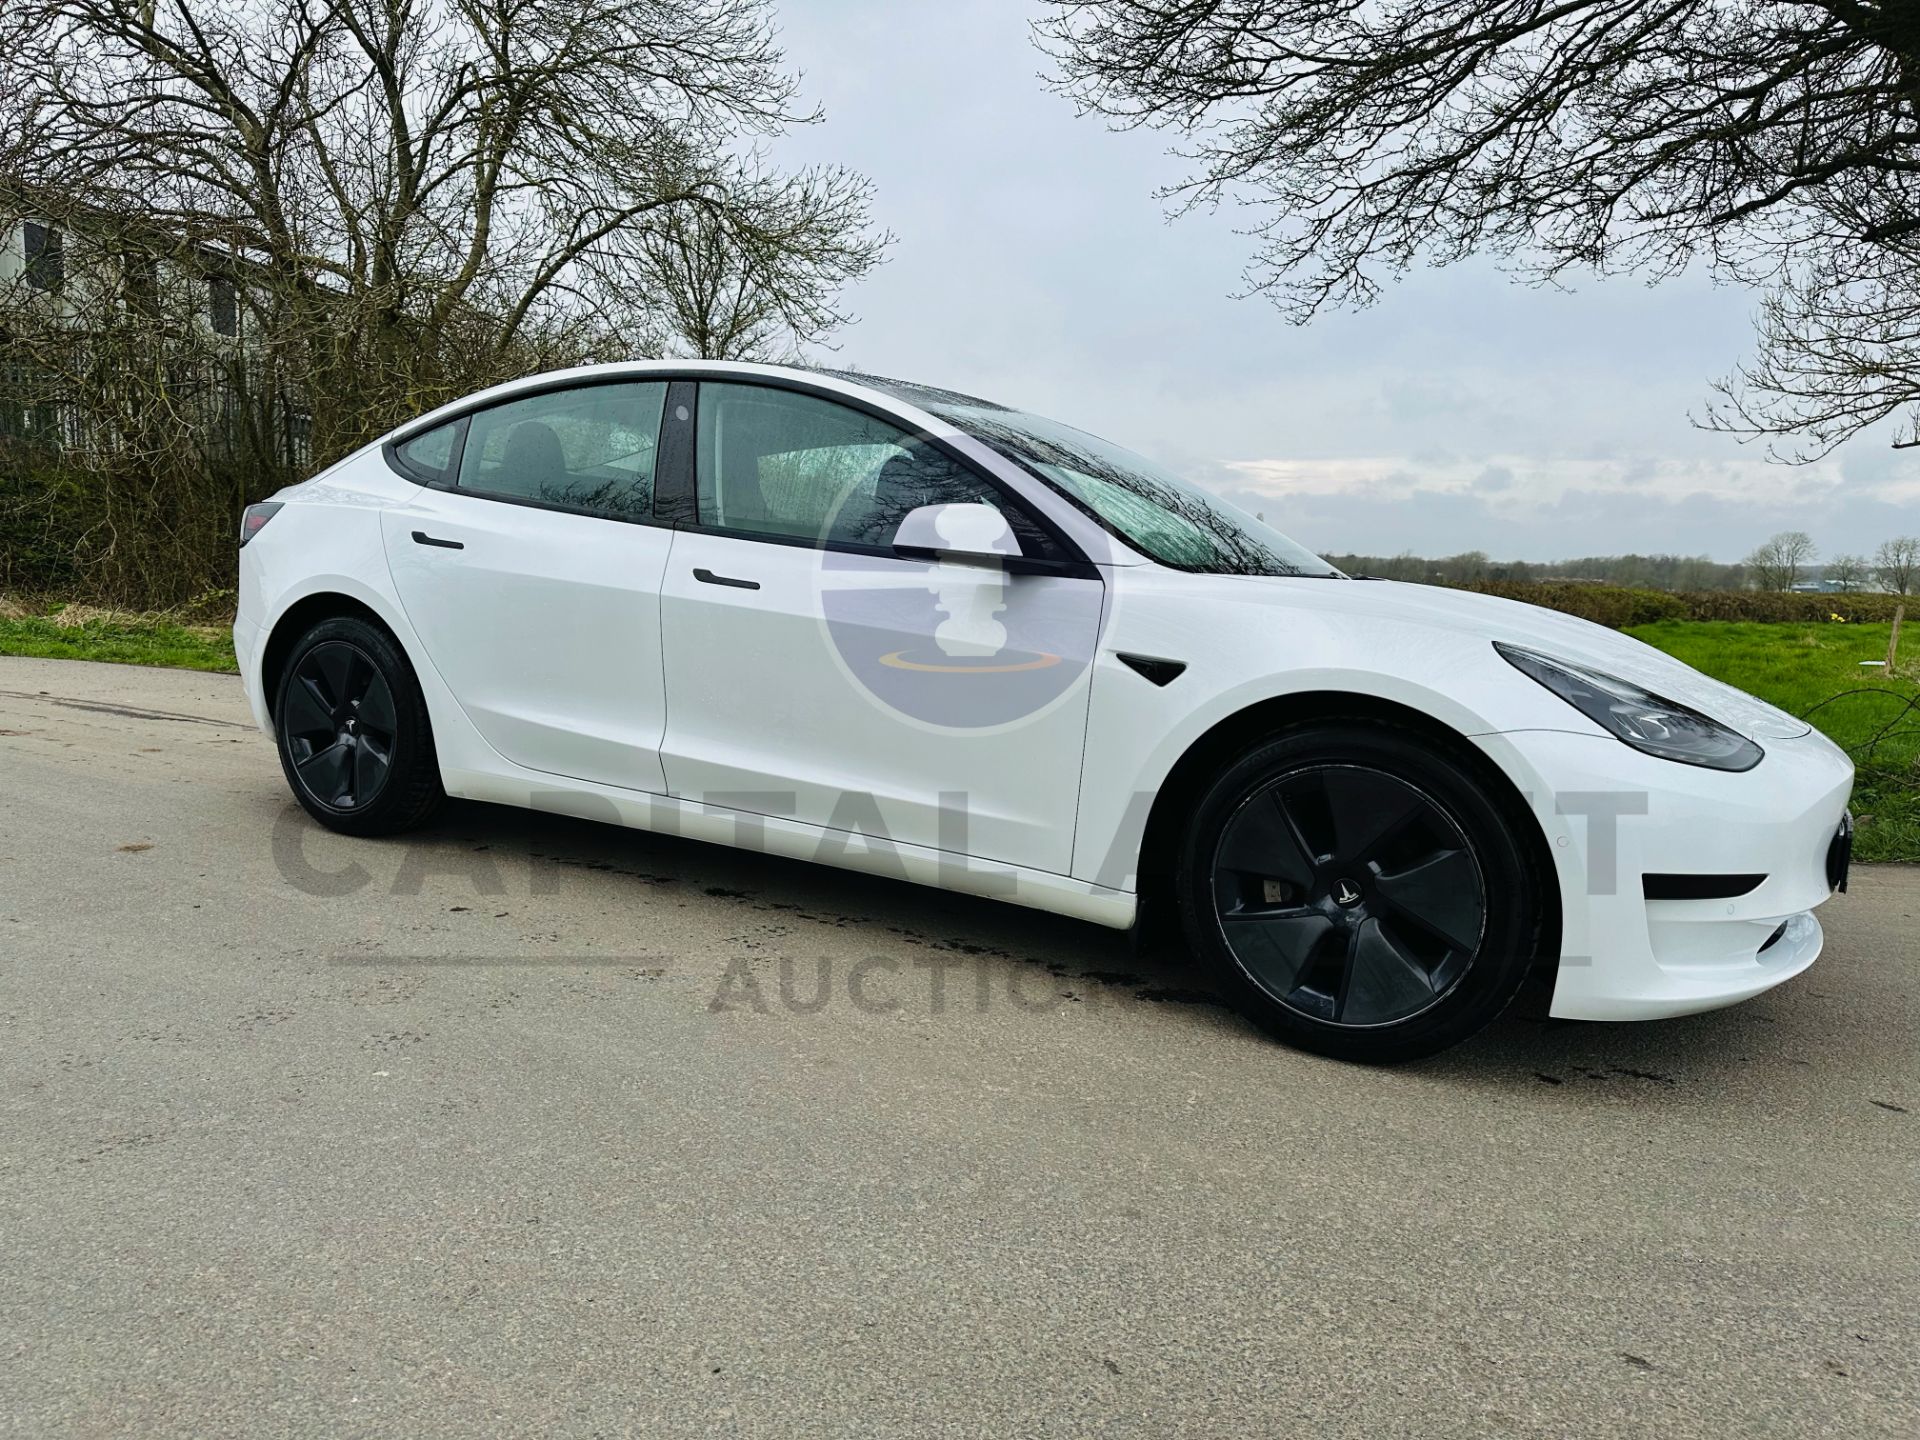 (ON SALE) TESLA MODEL 3 PLUS *PURE ELECTRIC* - 21 REG - PAN ROOF - LEATHER - TYPE 2 CHARGING CABLE!